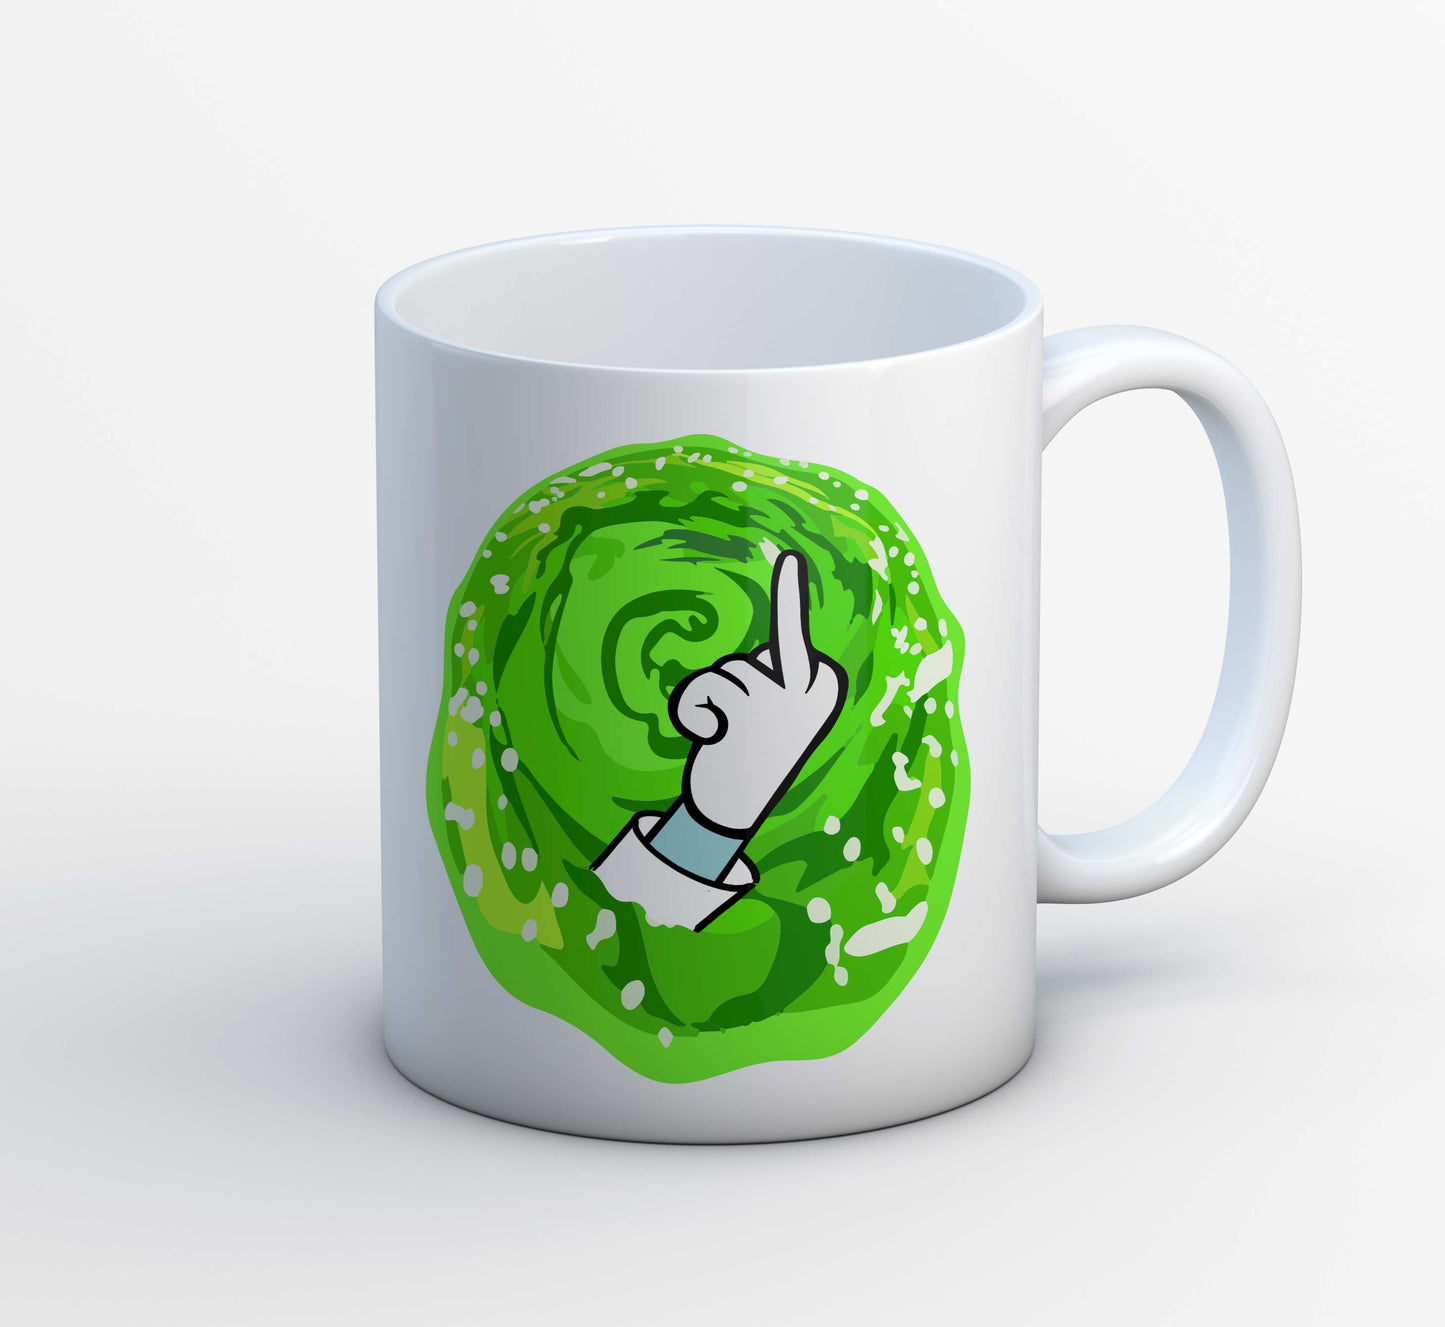 rick and morty intergalactic screw mug coffee ceramic buy online india the banyan tee tbt men women girls boys unisex  rick and morty online summer beth mr meeseeks jerry quote vector art clothing accessories merchandise